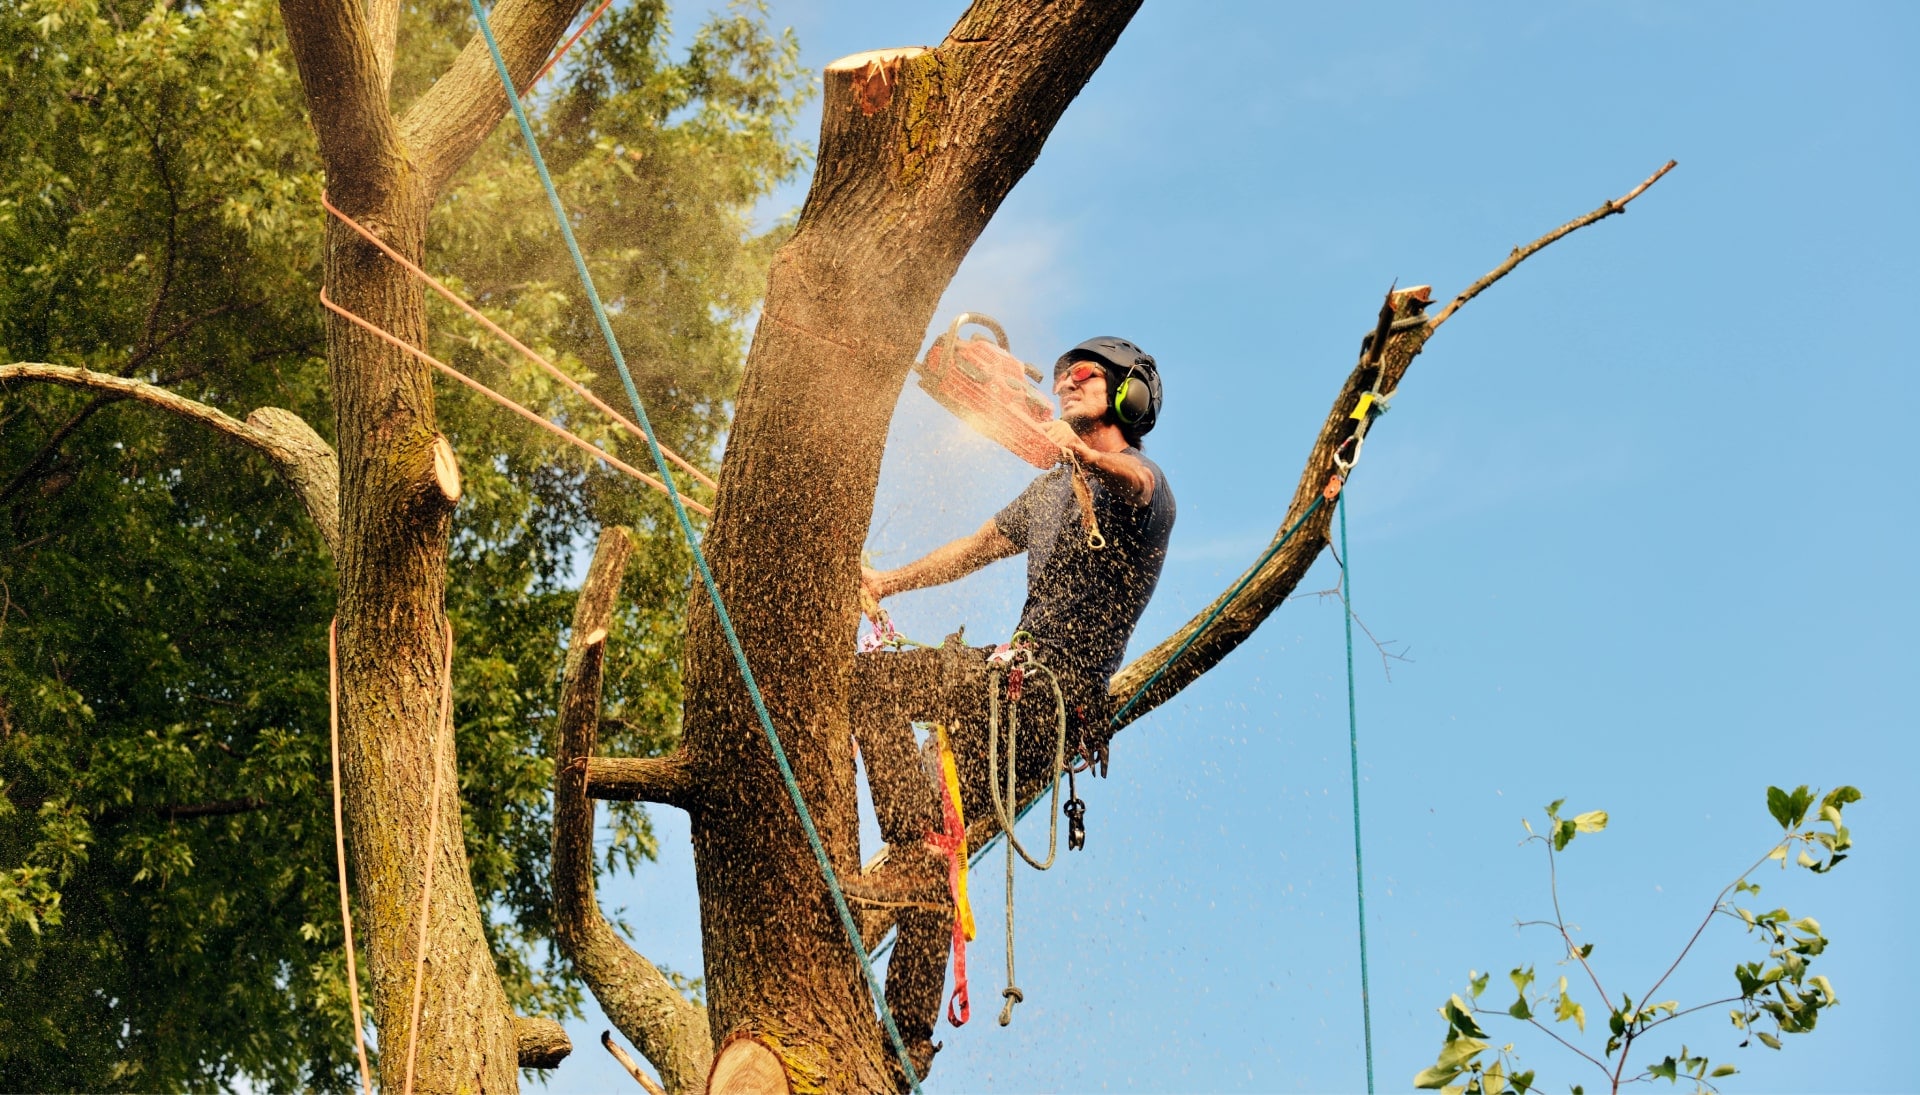 Lawrence tree removal experts solve tree issues.